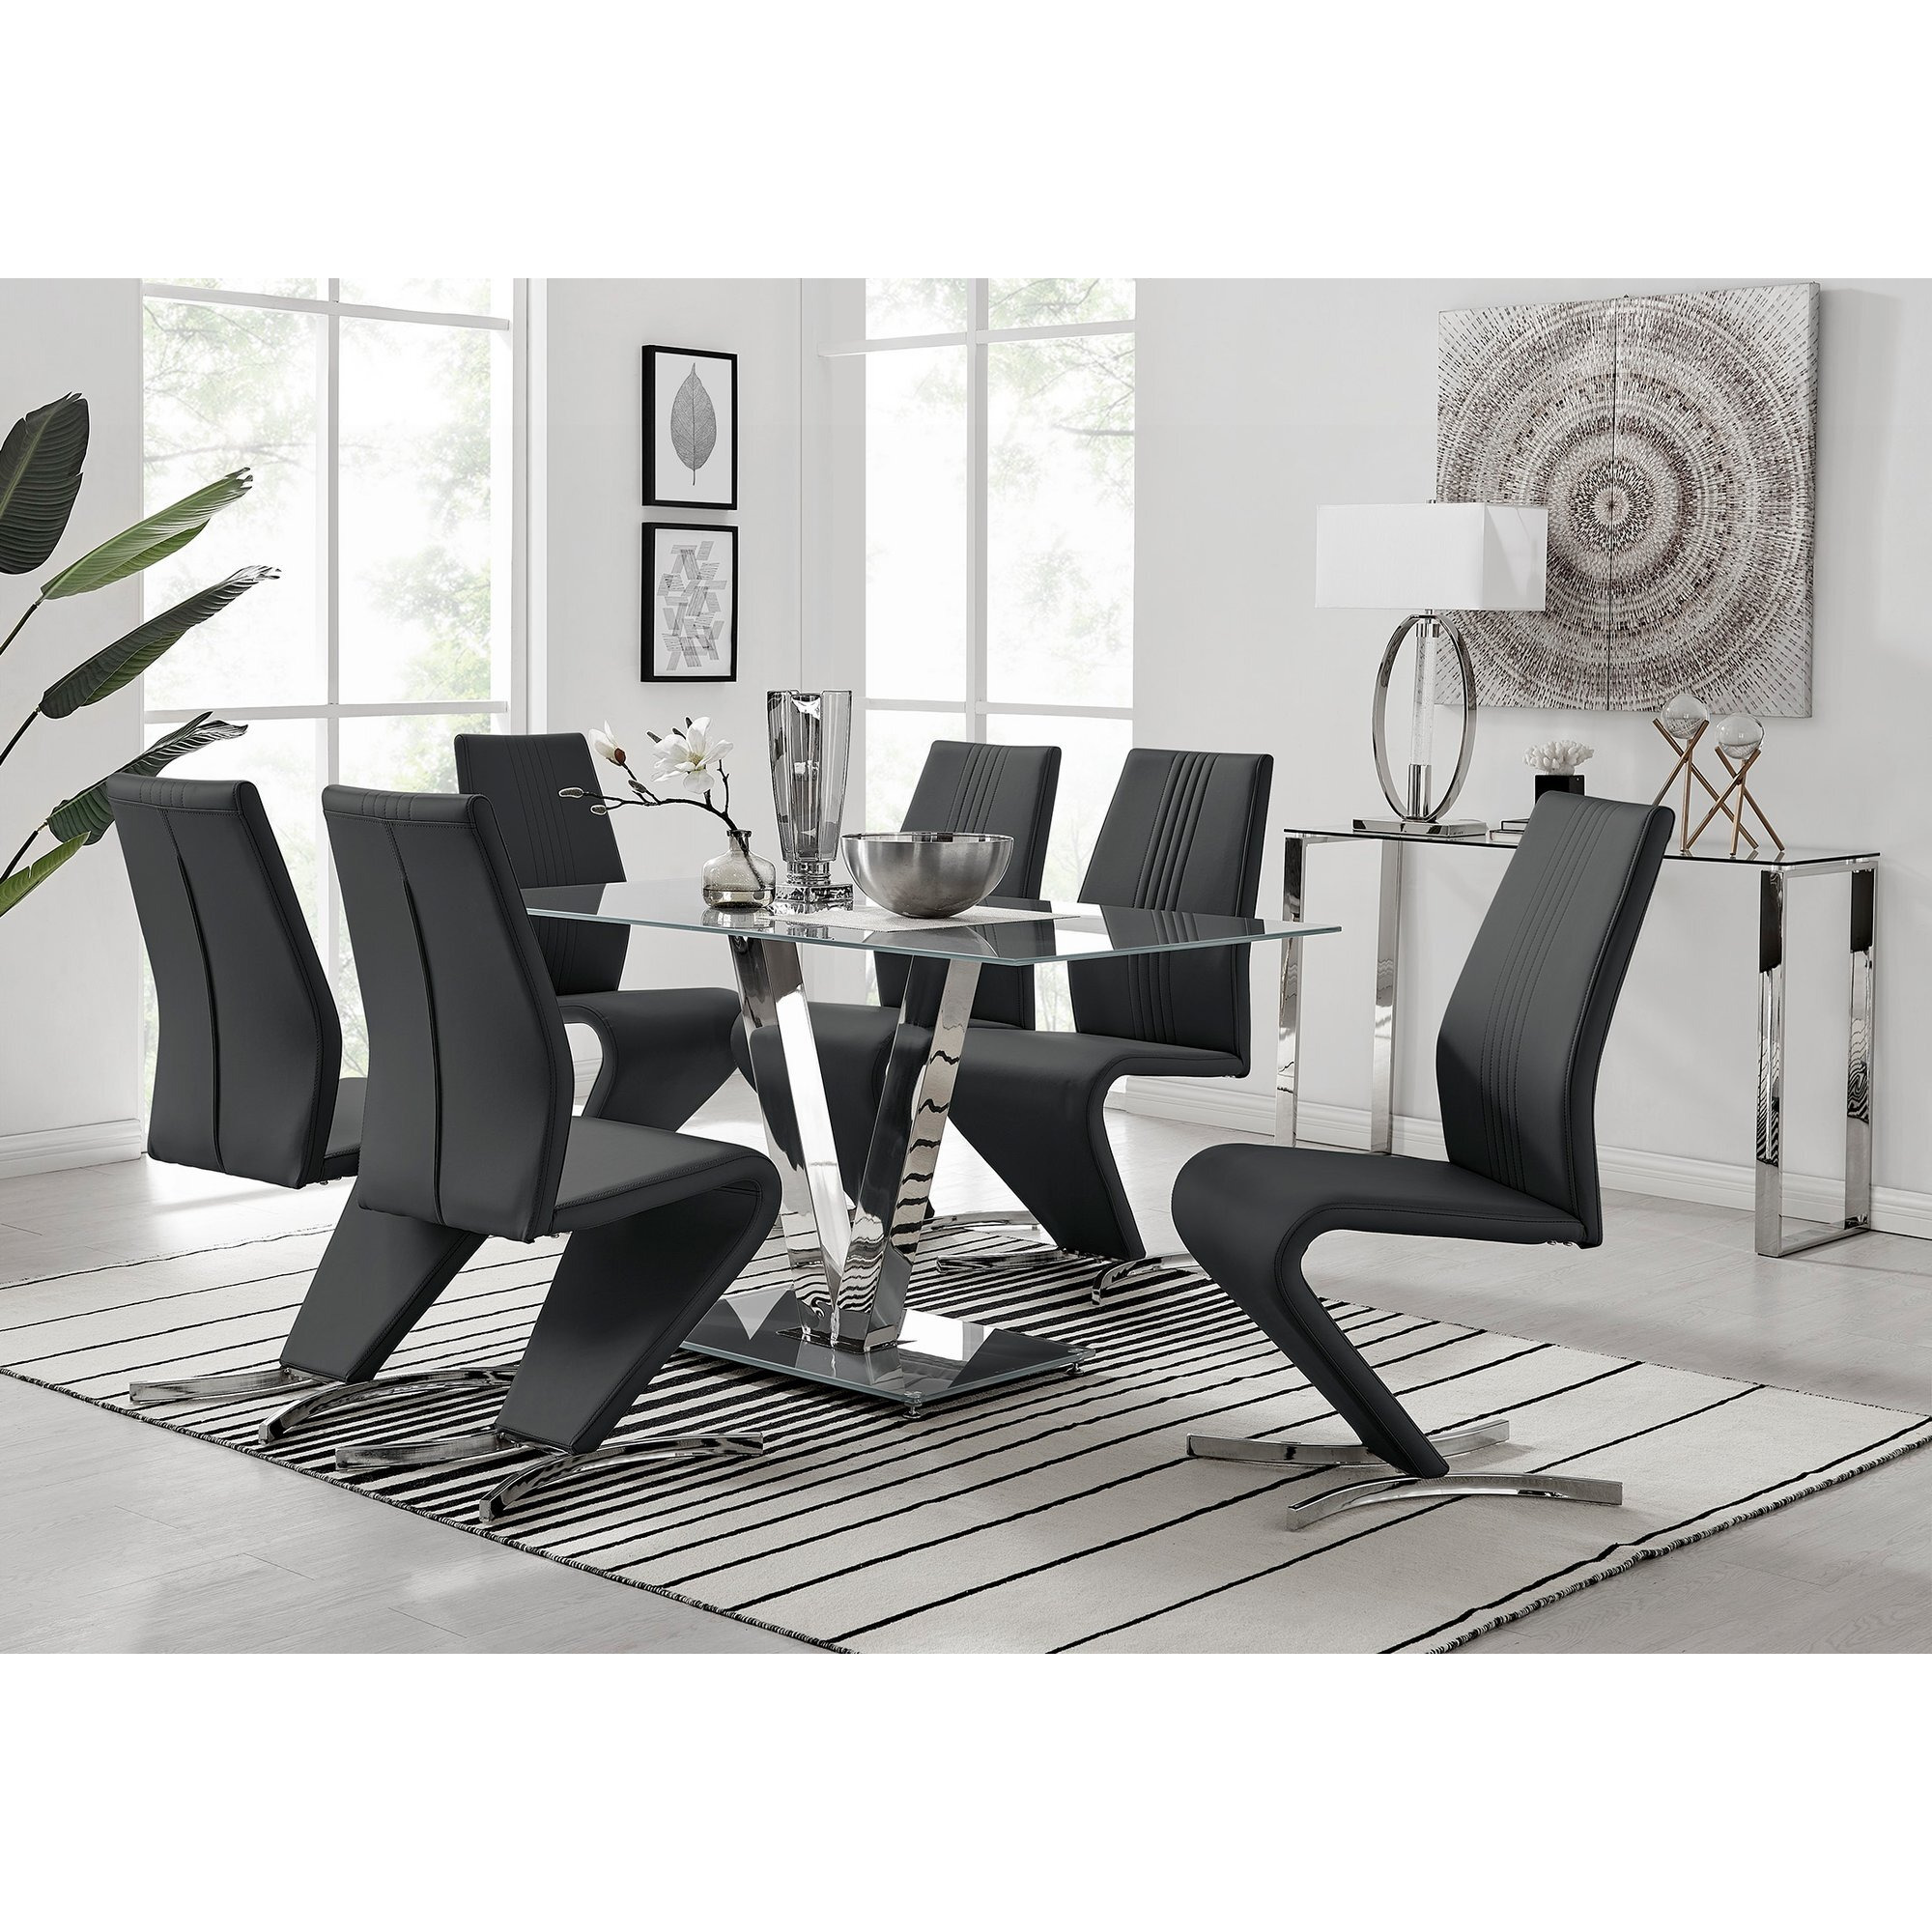 Florini V Grey Dining Table and 6 Willow Chairs